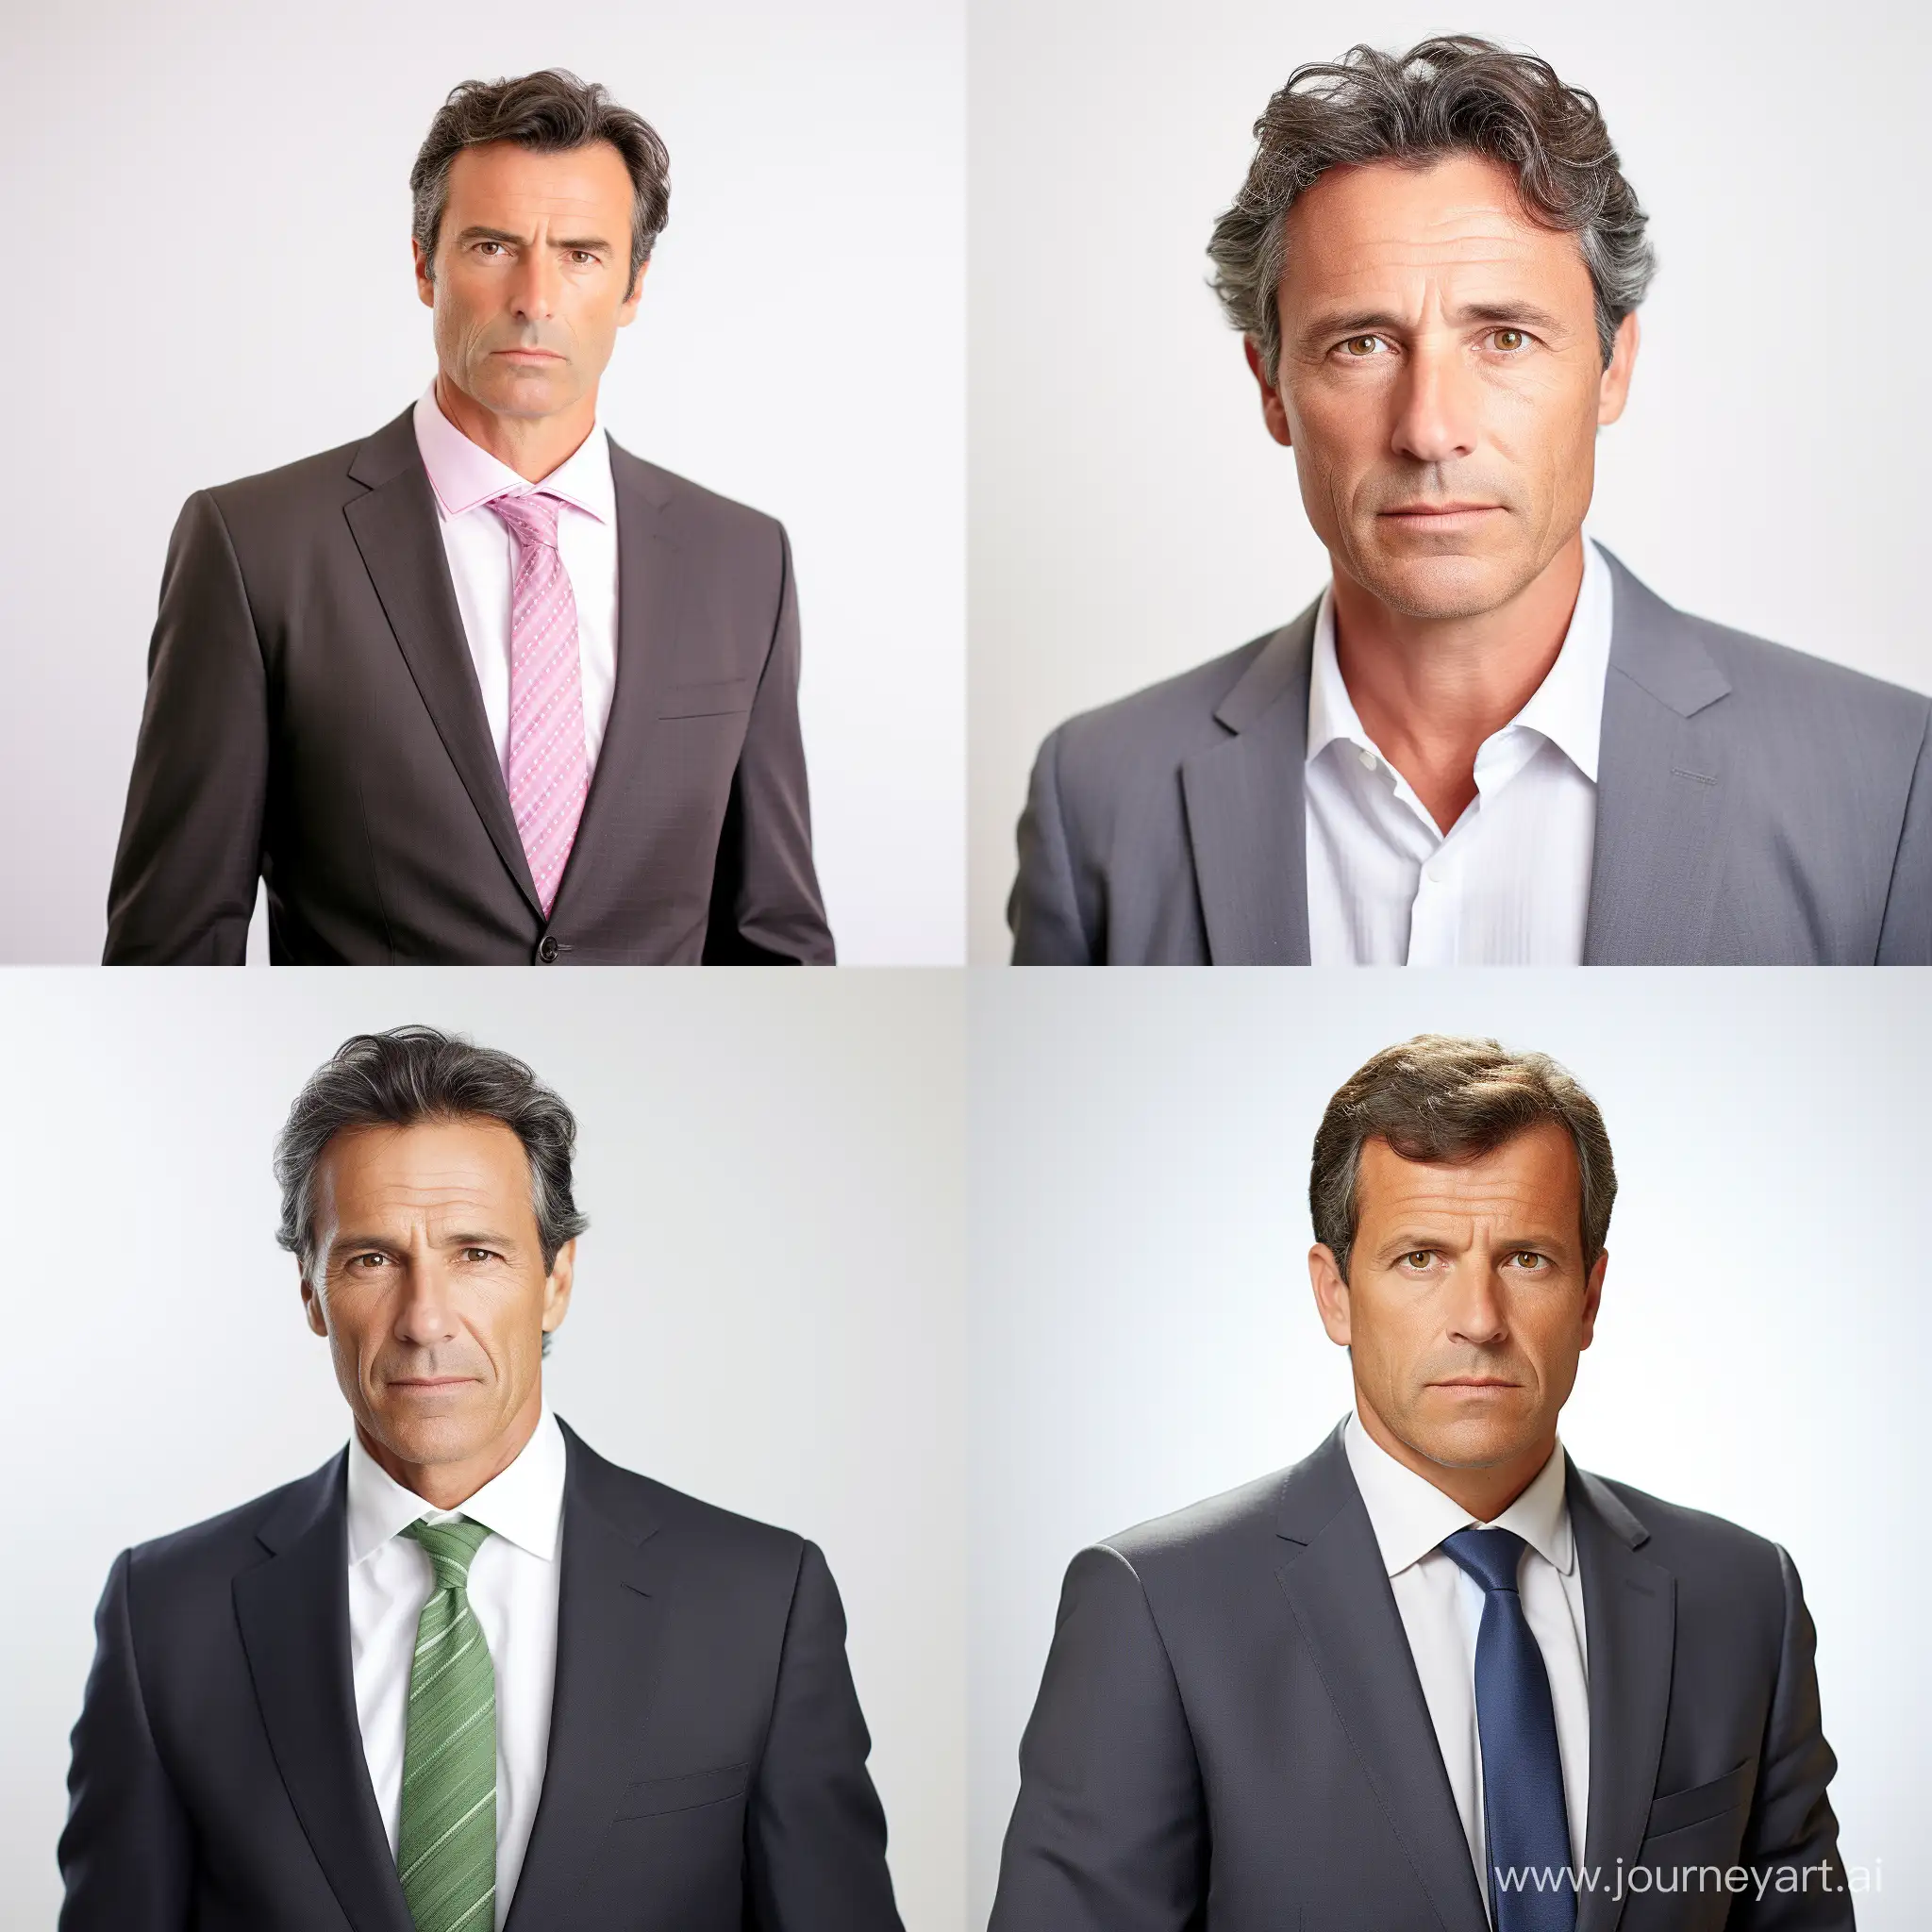 Man, Neutral expression, 50 years old, Dark hair, Light eyes, Business attire, White background, High resolution, Bright colors, Sharp, Natural light, Looks at camera, stands exactly